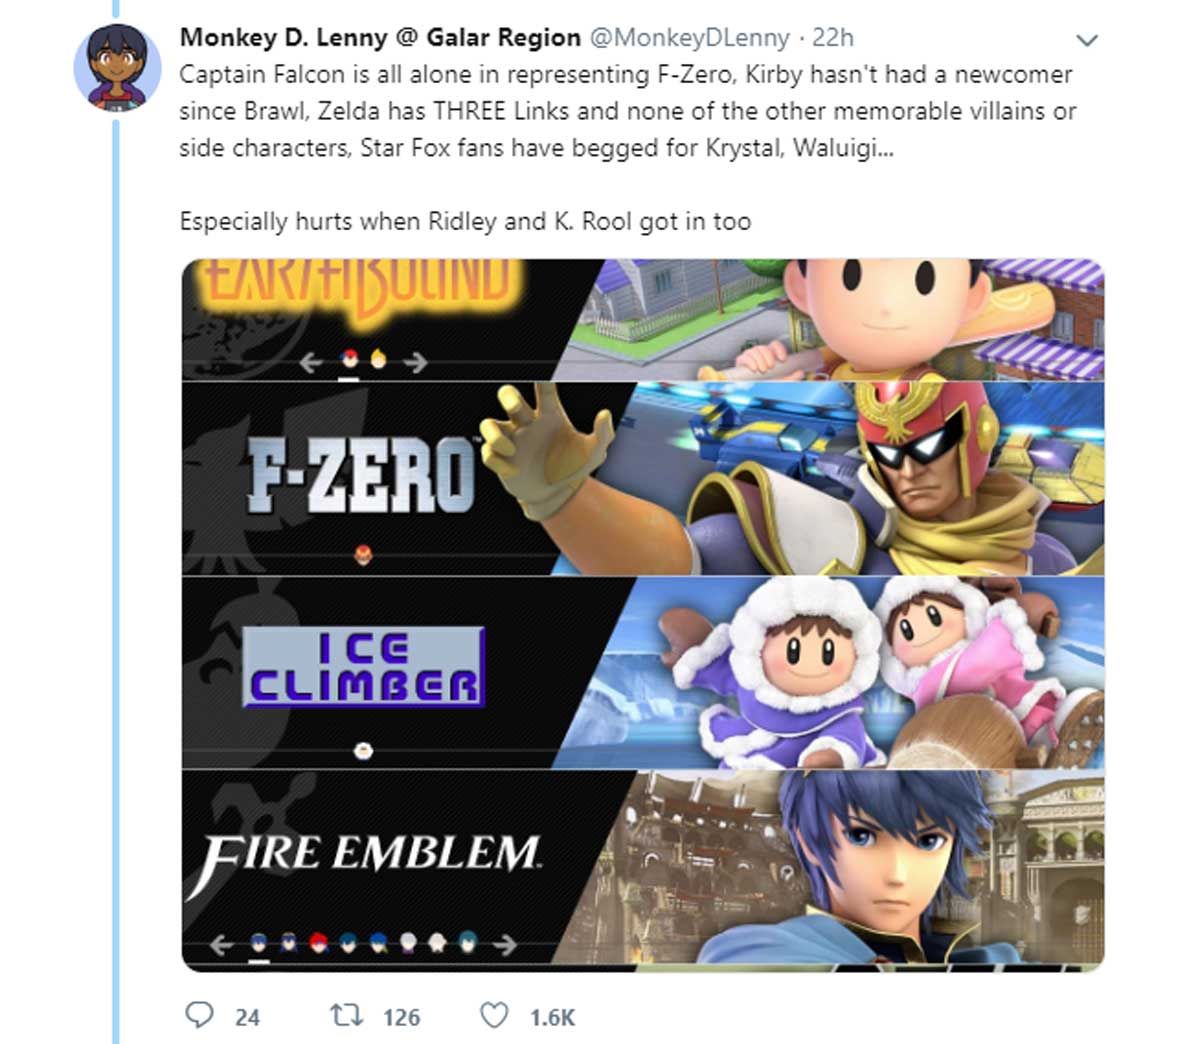 fire emblem awakening - Monkey D. Lenny @ Galar Region 22h Captain Falcon is all alone in representing FZero, Kirby hasn't had a newcomer since Brawl, Zelda has Three Links and none of the other memorable villains or side characters, Star Fox fans have be